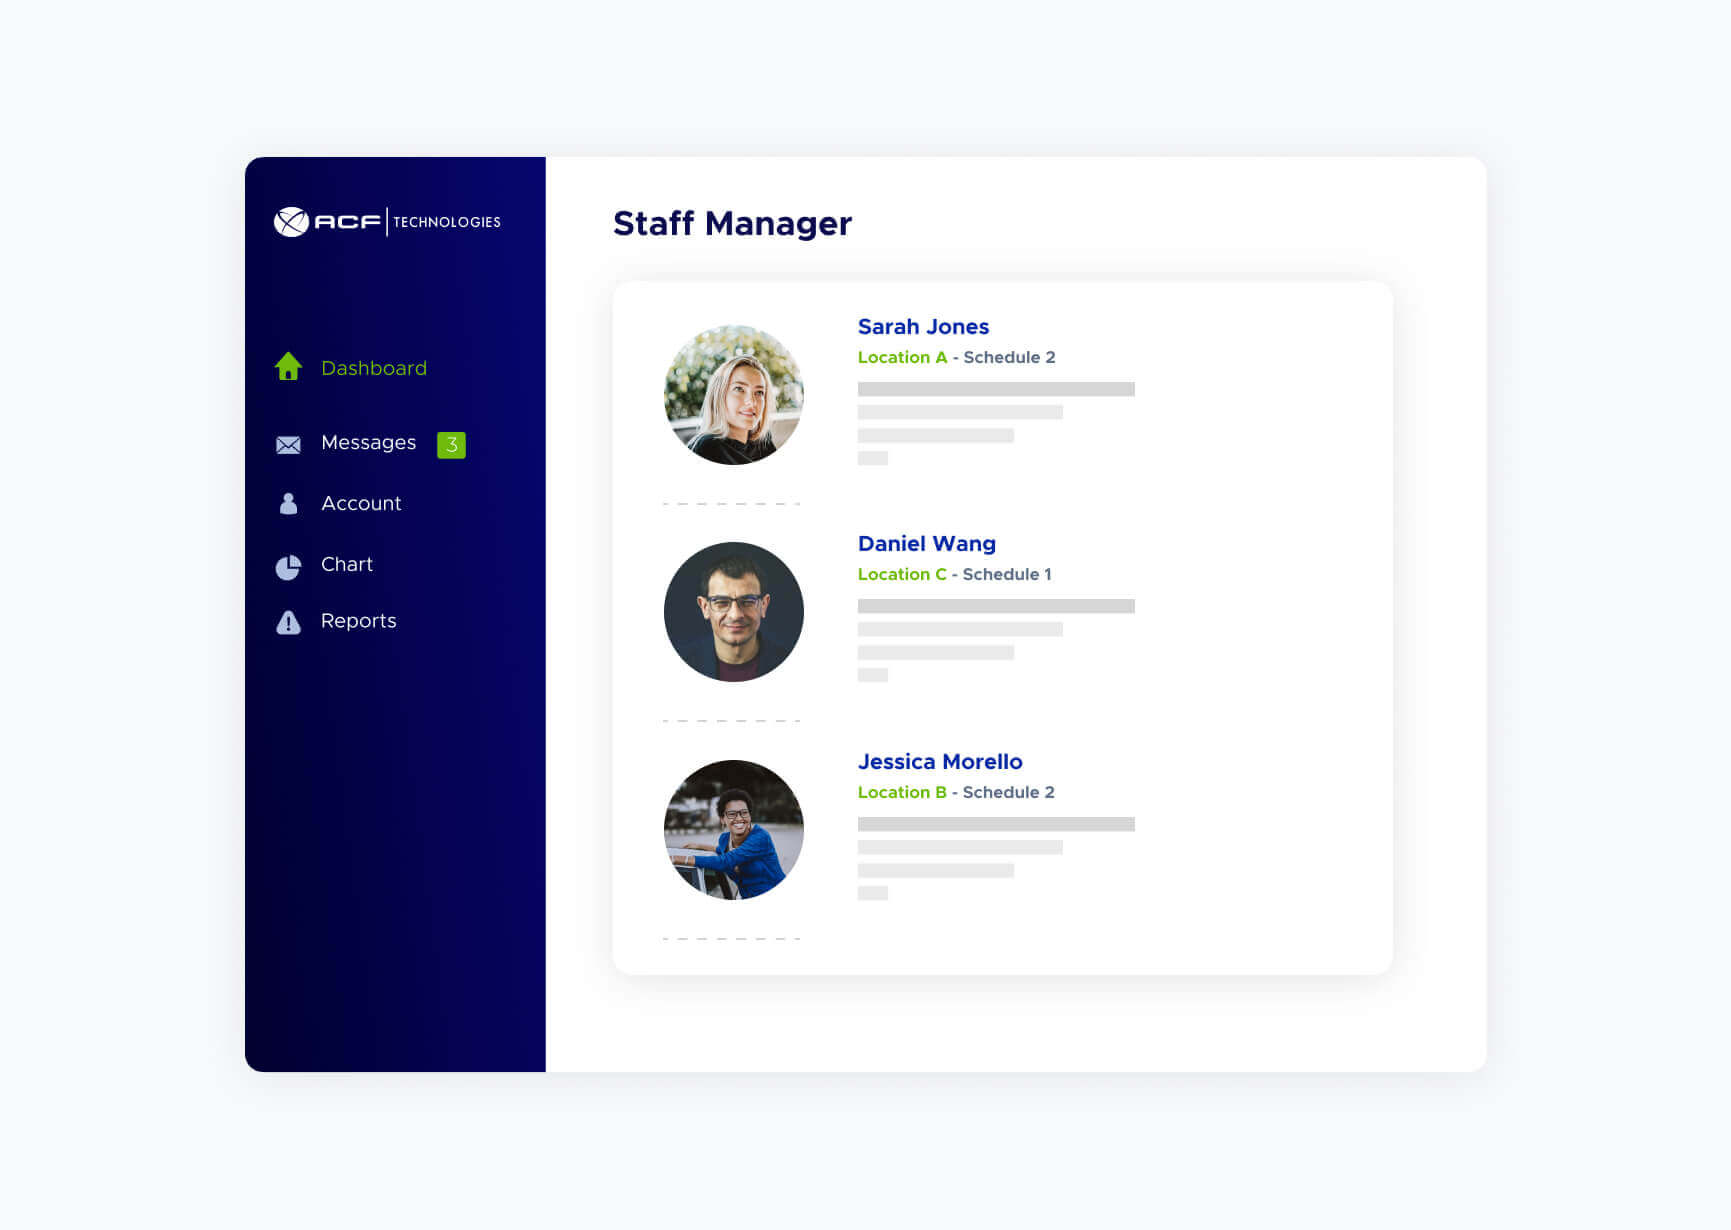 Screen view of the Staff Management Solution of ACF Technologies